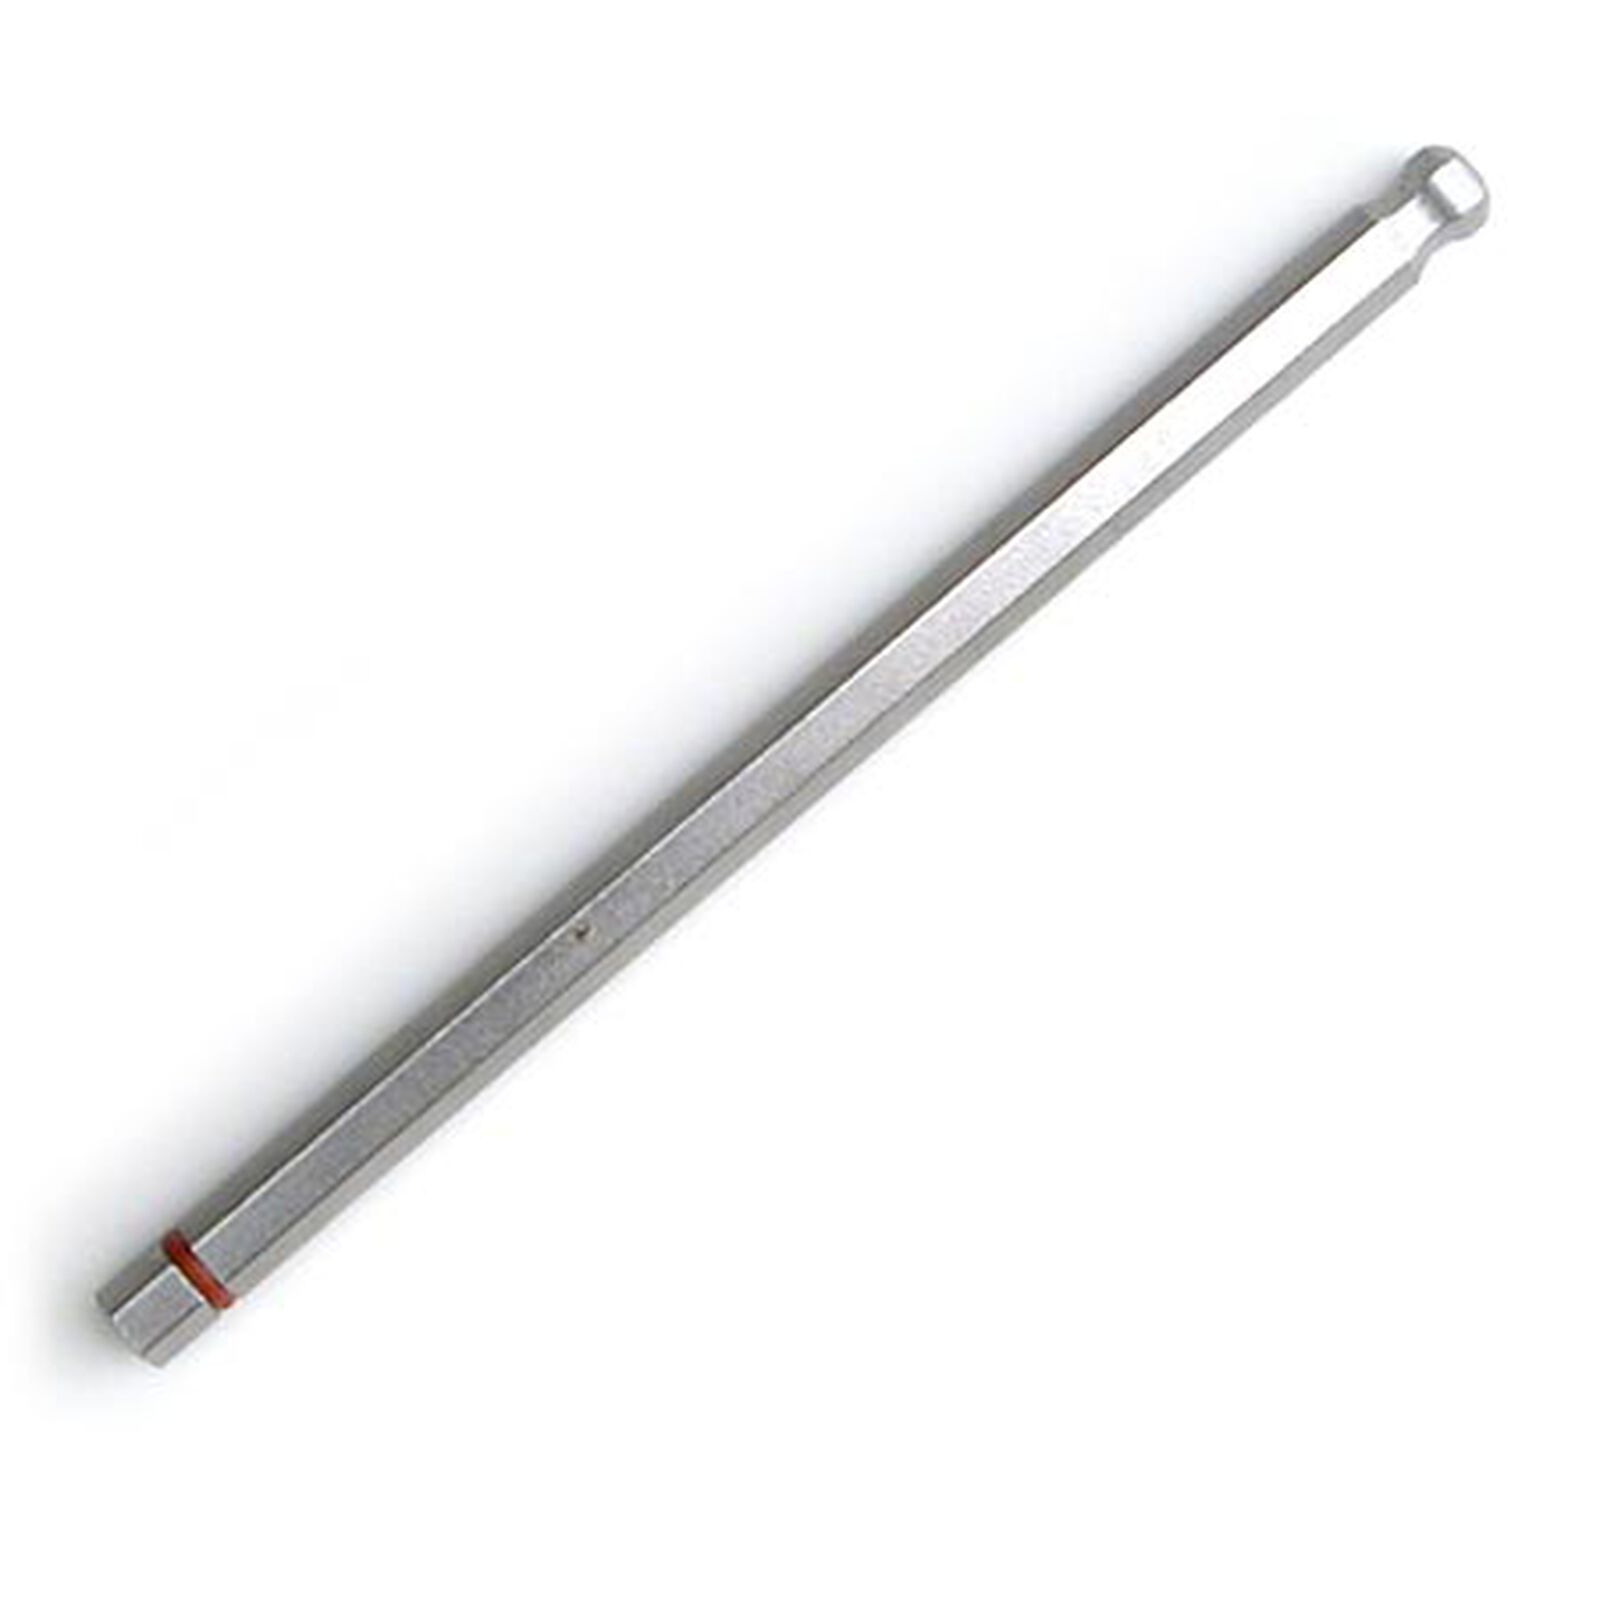 Spin-Start Hex Drive Rod: LST, LST2, AFT, MGB